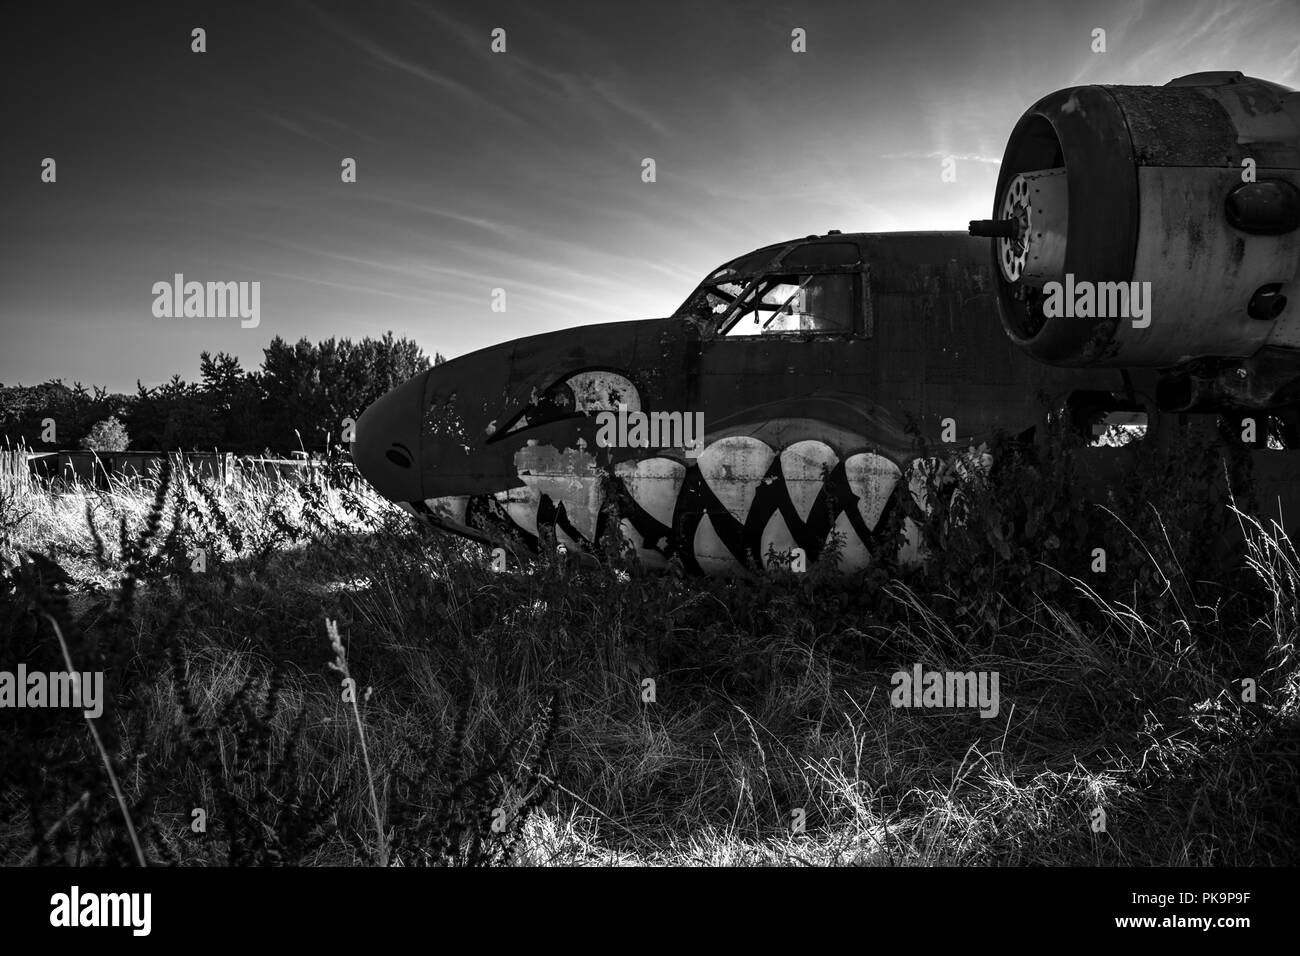 World War 2 plane abandoned at a disused airport in the UK. Stock Photo